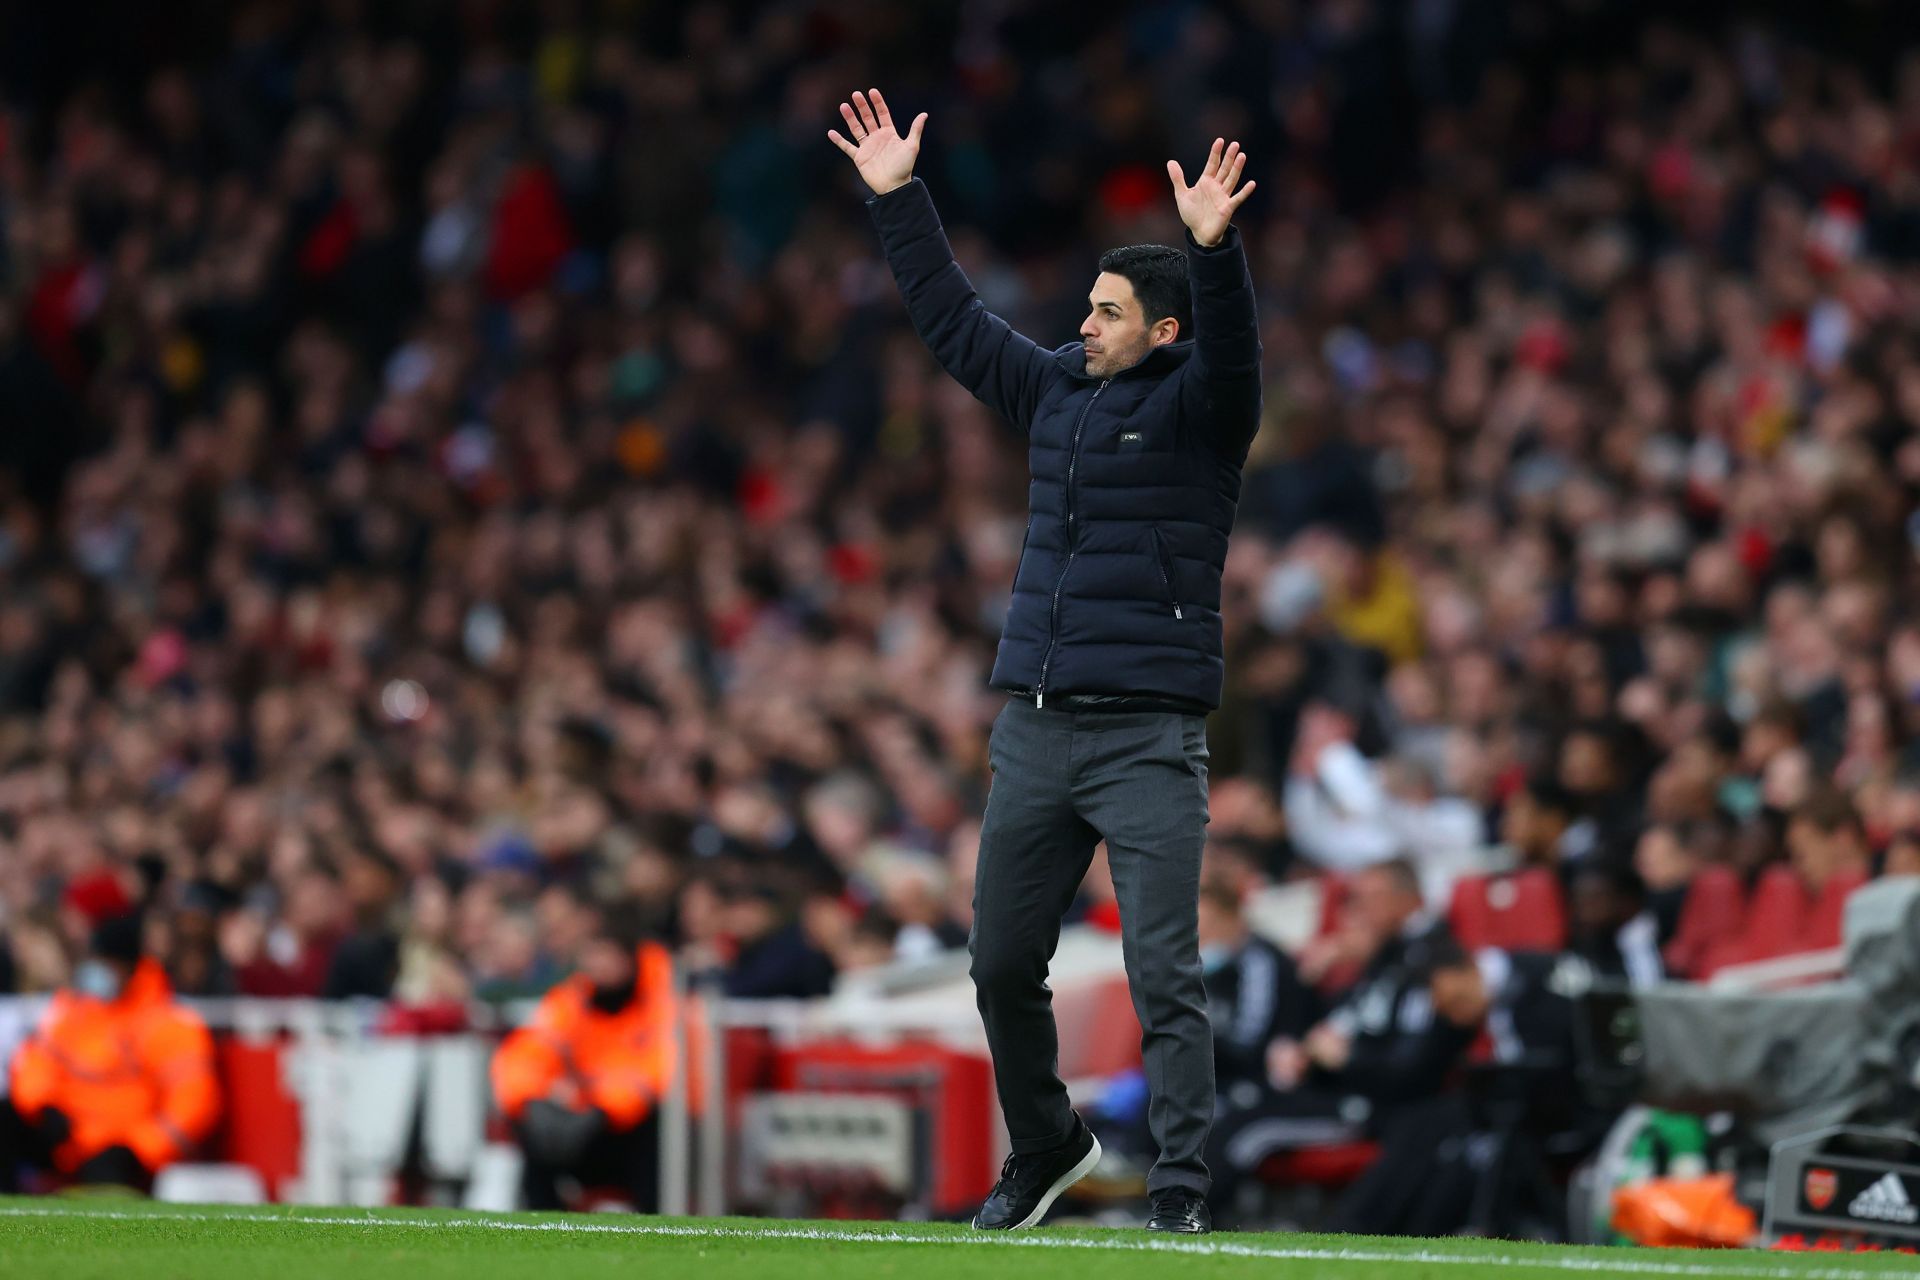 Arsenal manager Mikel Arteta is preparing to face Liverpool